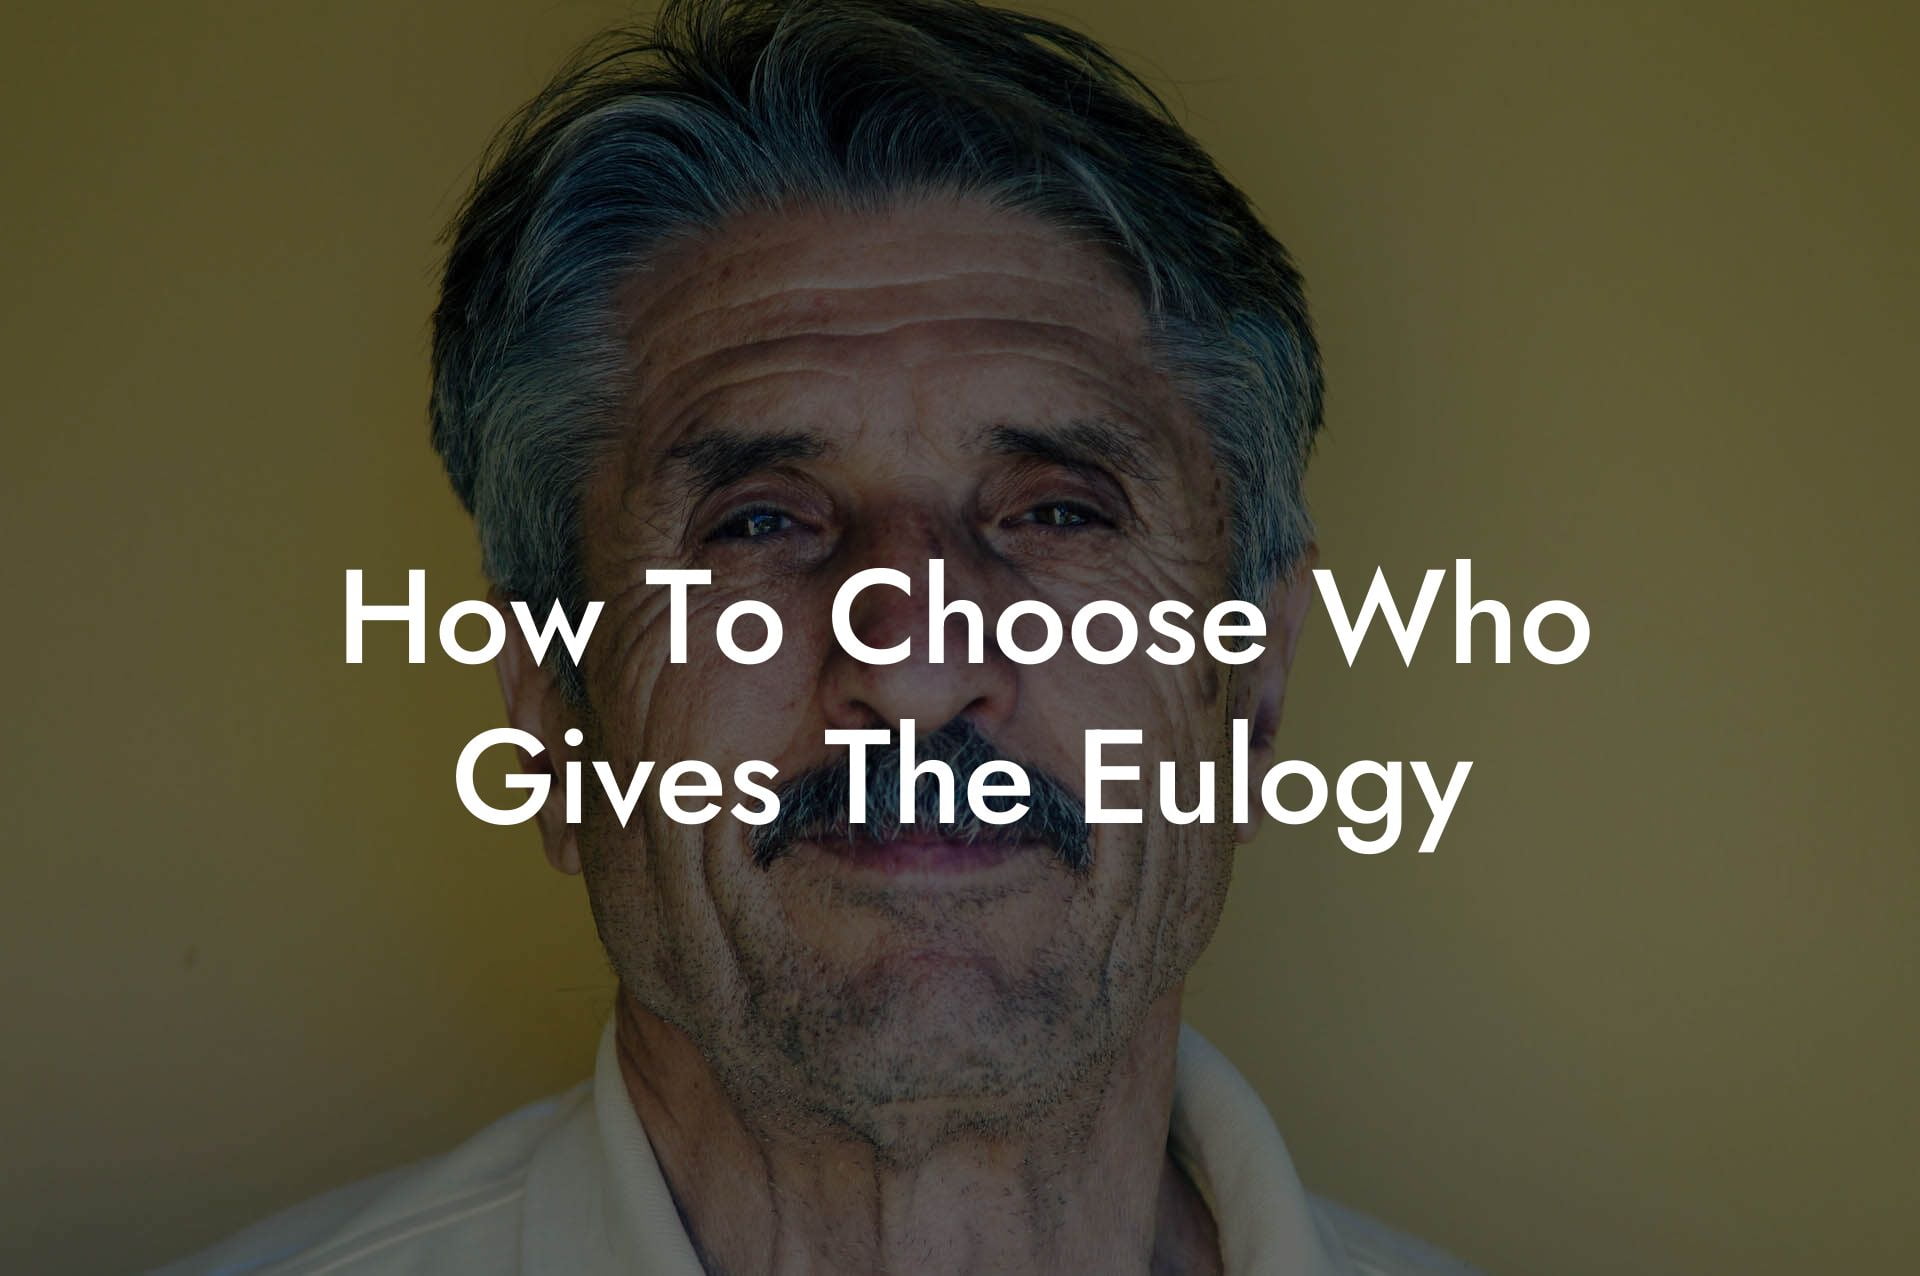 How To Choose Who Gives The Eulogy